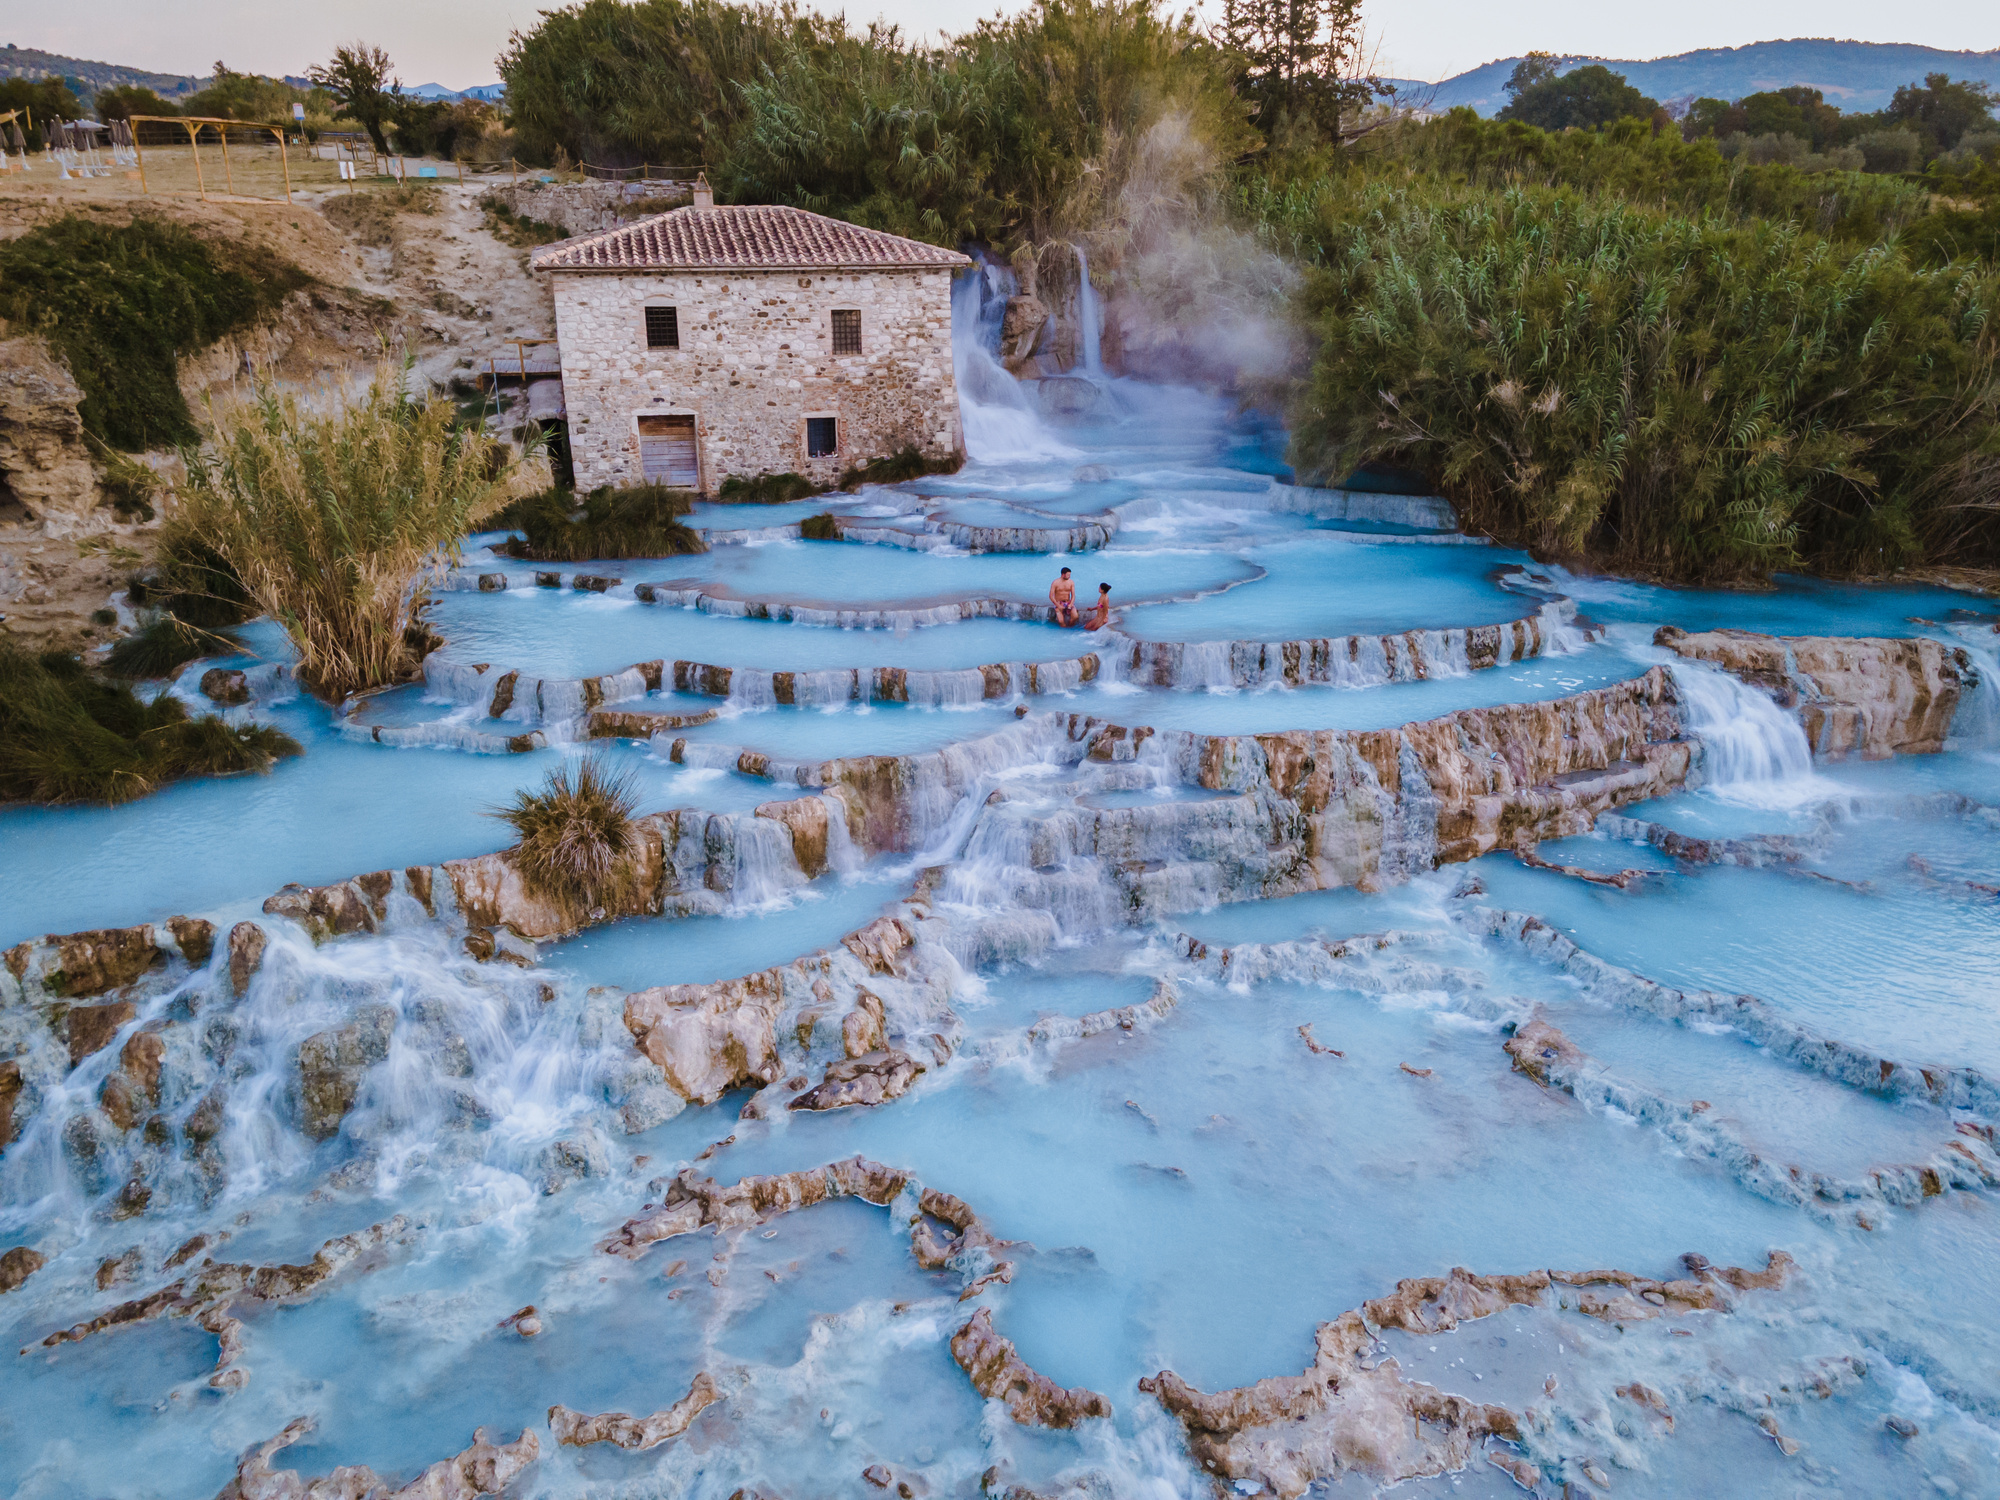 Toscane Italy, Natural Spa with Waterfalls and Hot Springs at Saturnia Thermal Baths, Grosseto, Tuscany, Italy Aerial View on the Natural Thermal Waterfalls at Saturnia